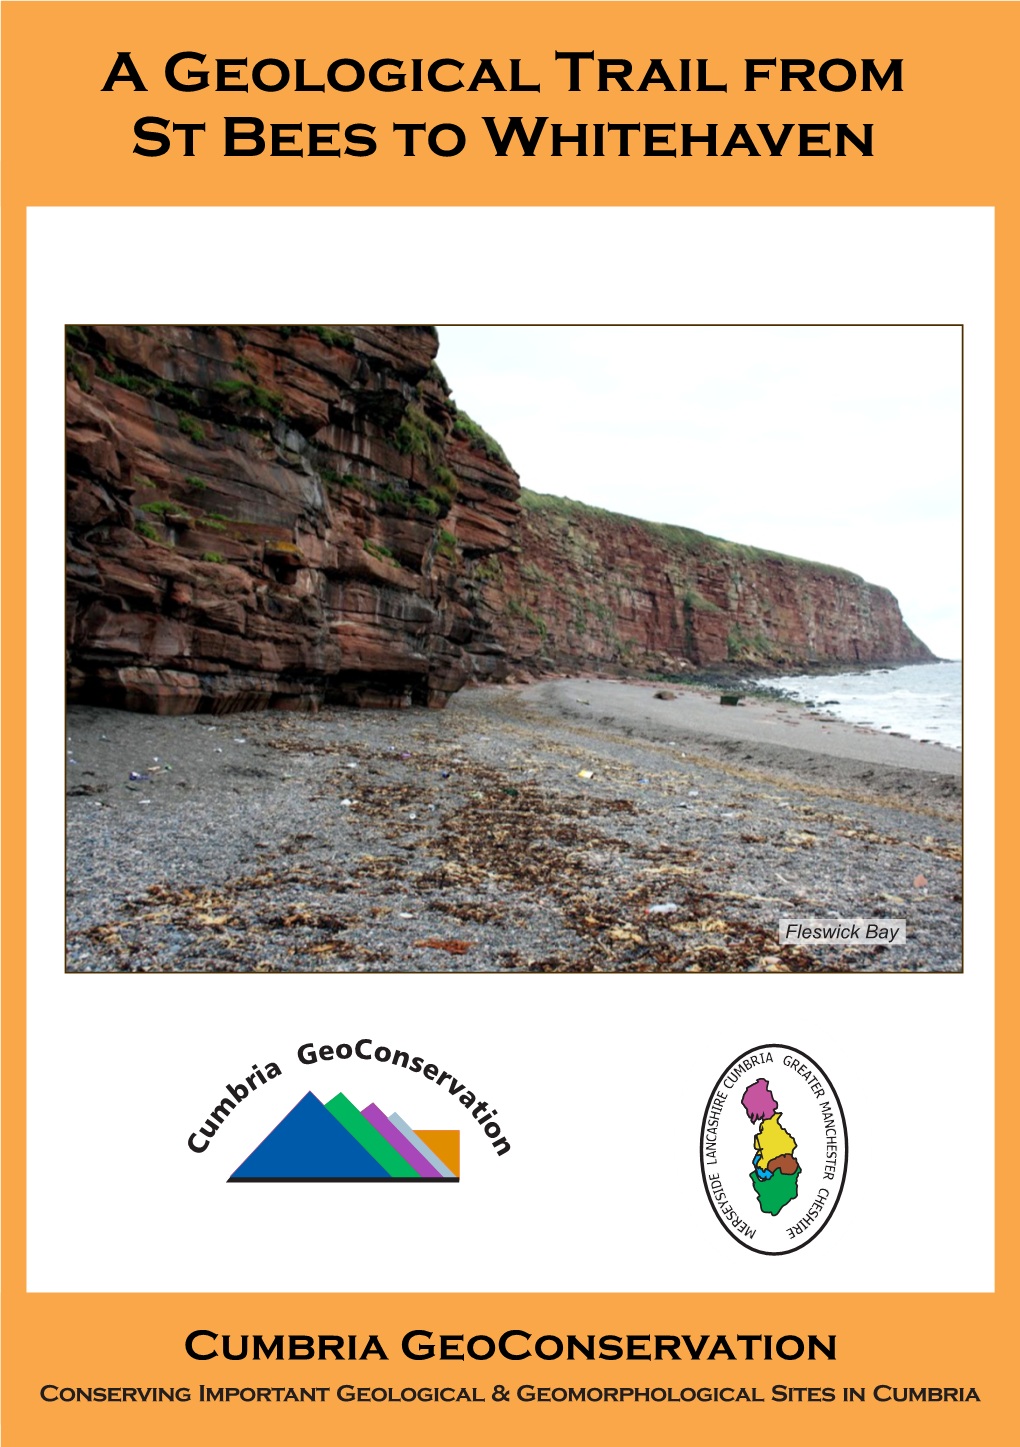 A Geological Trail from St Bees to Whitehaven